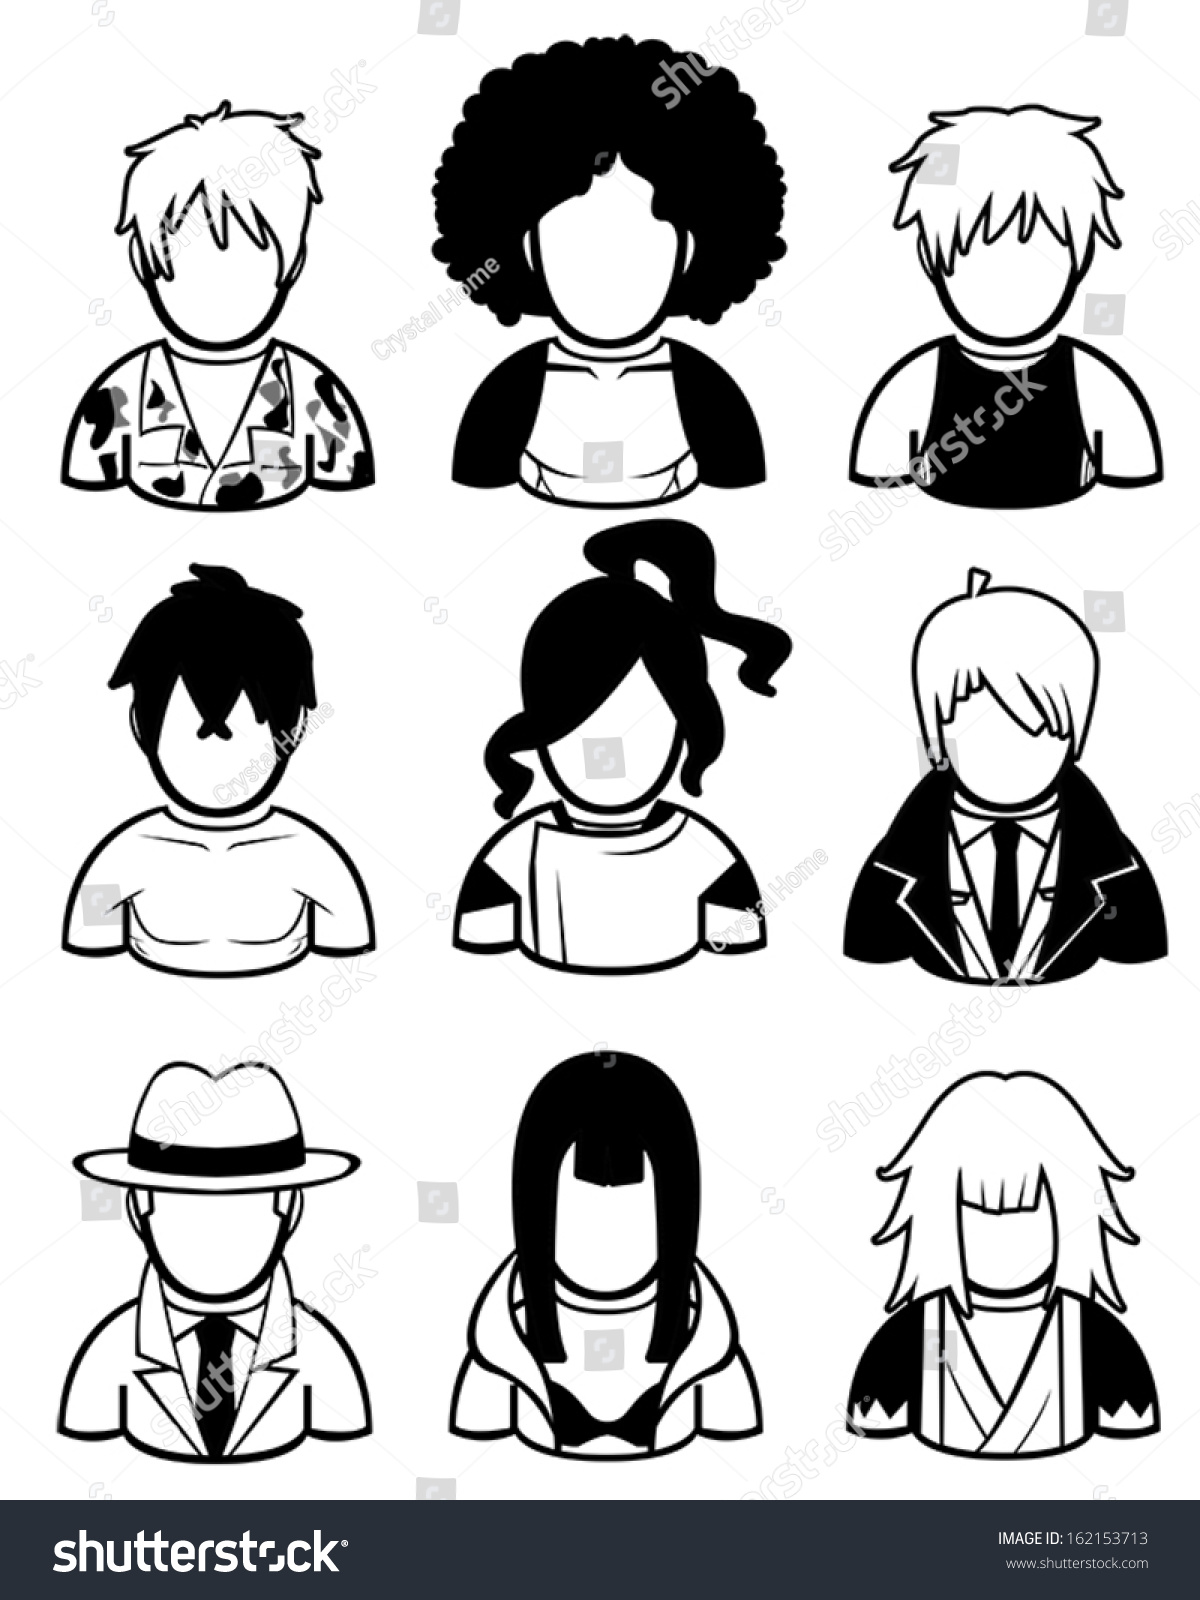 SVG of Silhouette men icon set in different costume fashion culture style and era such as hipster, mafia, businessman, afro, and samurai, create by cartoon vector svg